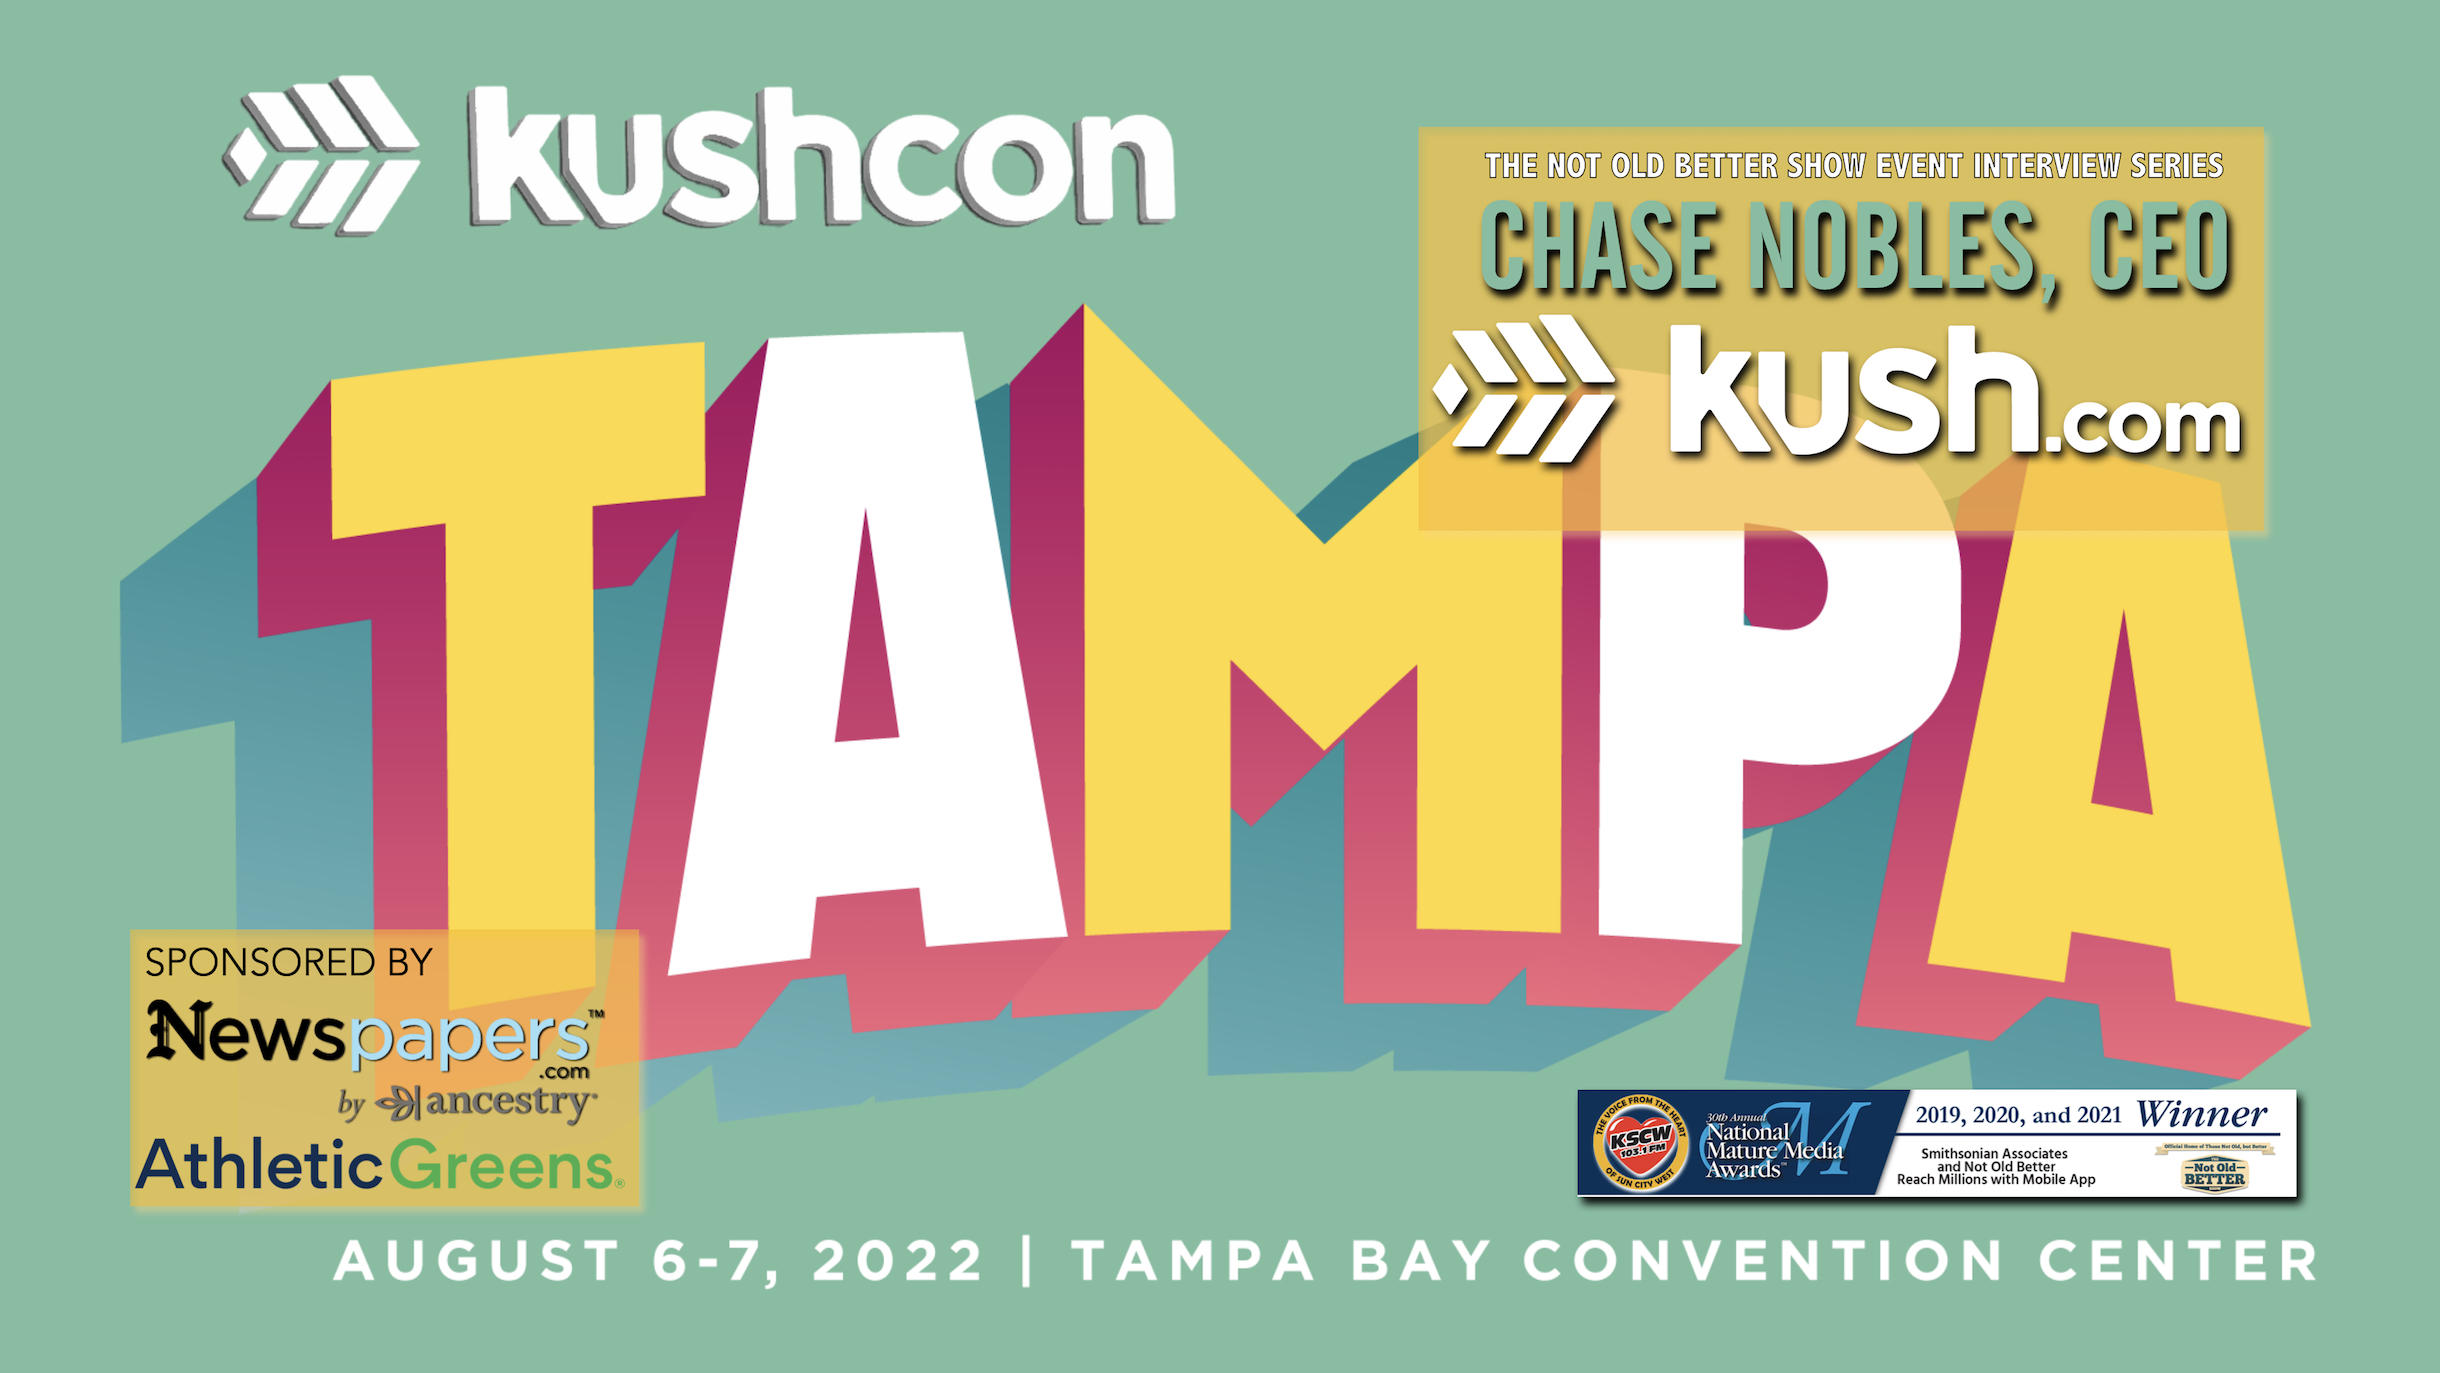 KushCon 2022 – Chase Nobles, CEO, and Dr. Steven Grant